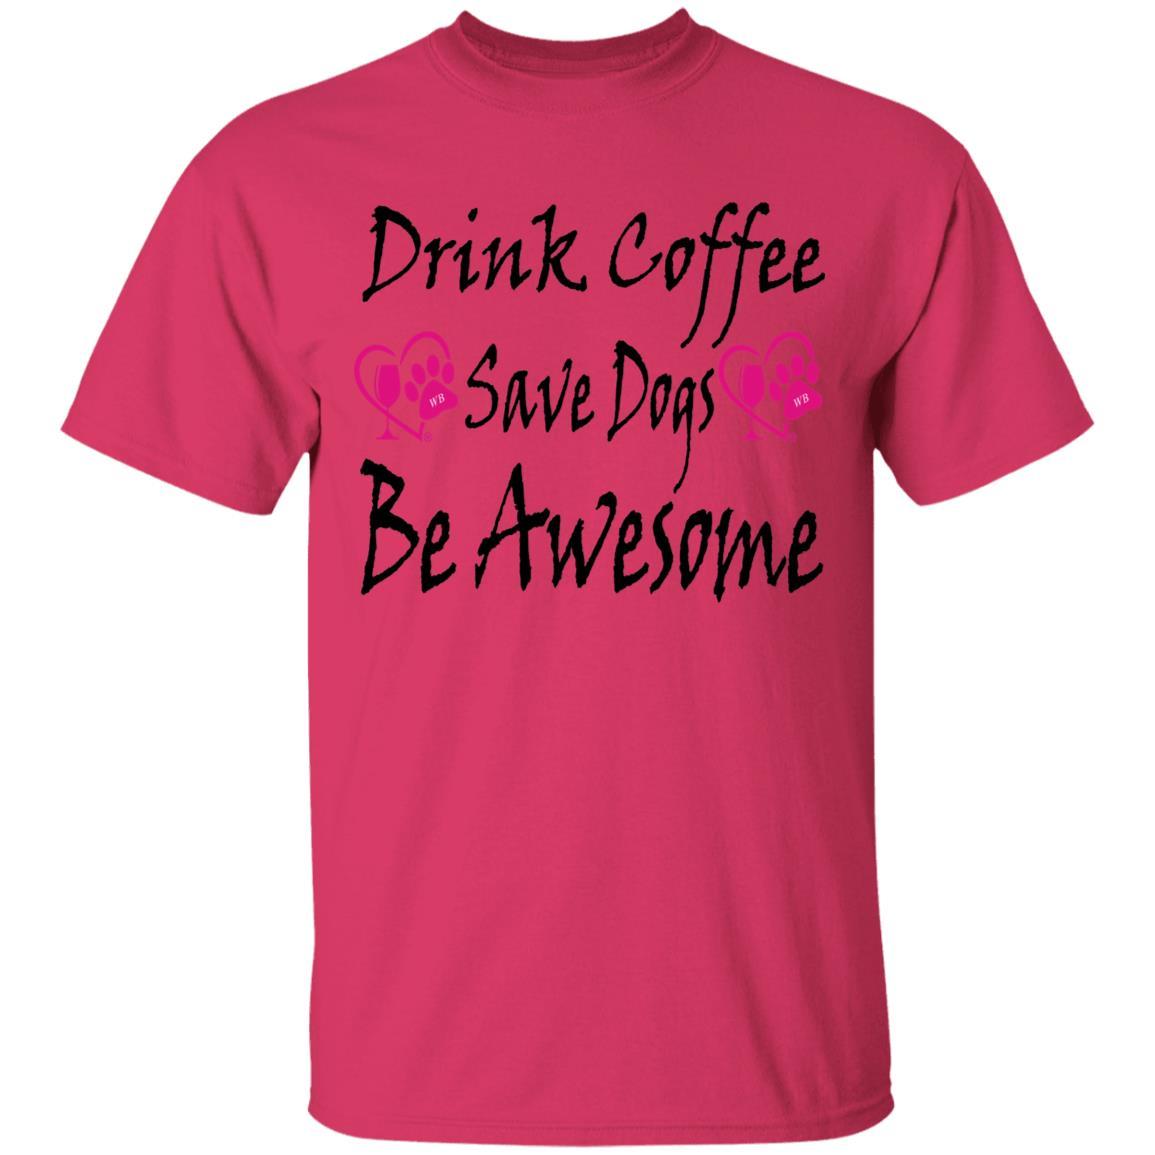 T-Shirts Heliconia / S Winey Bitches Co "Drink Coffee Save Dogs Be Awesome" 5.3 oz. T-Shirt WineyBitchesCo